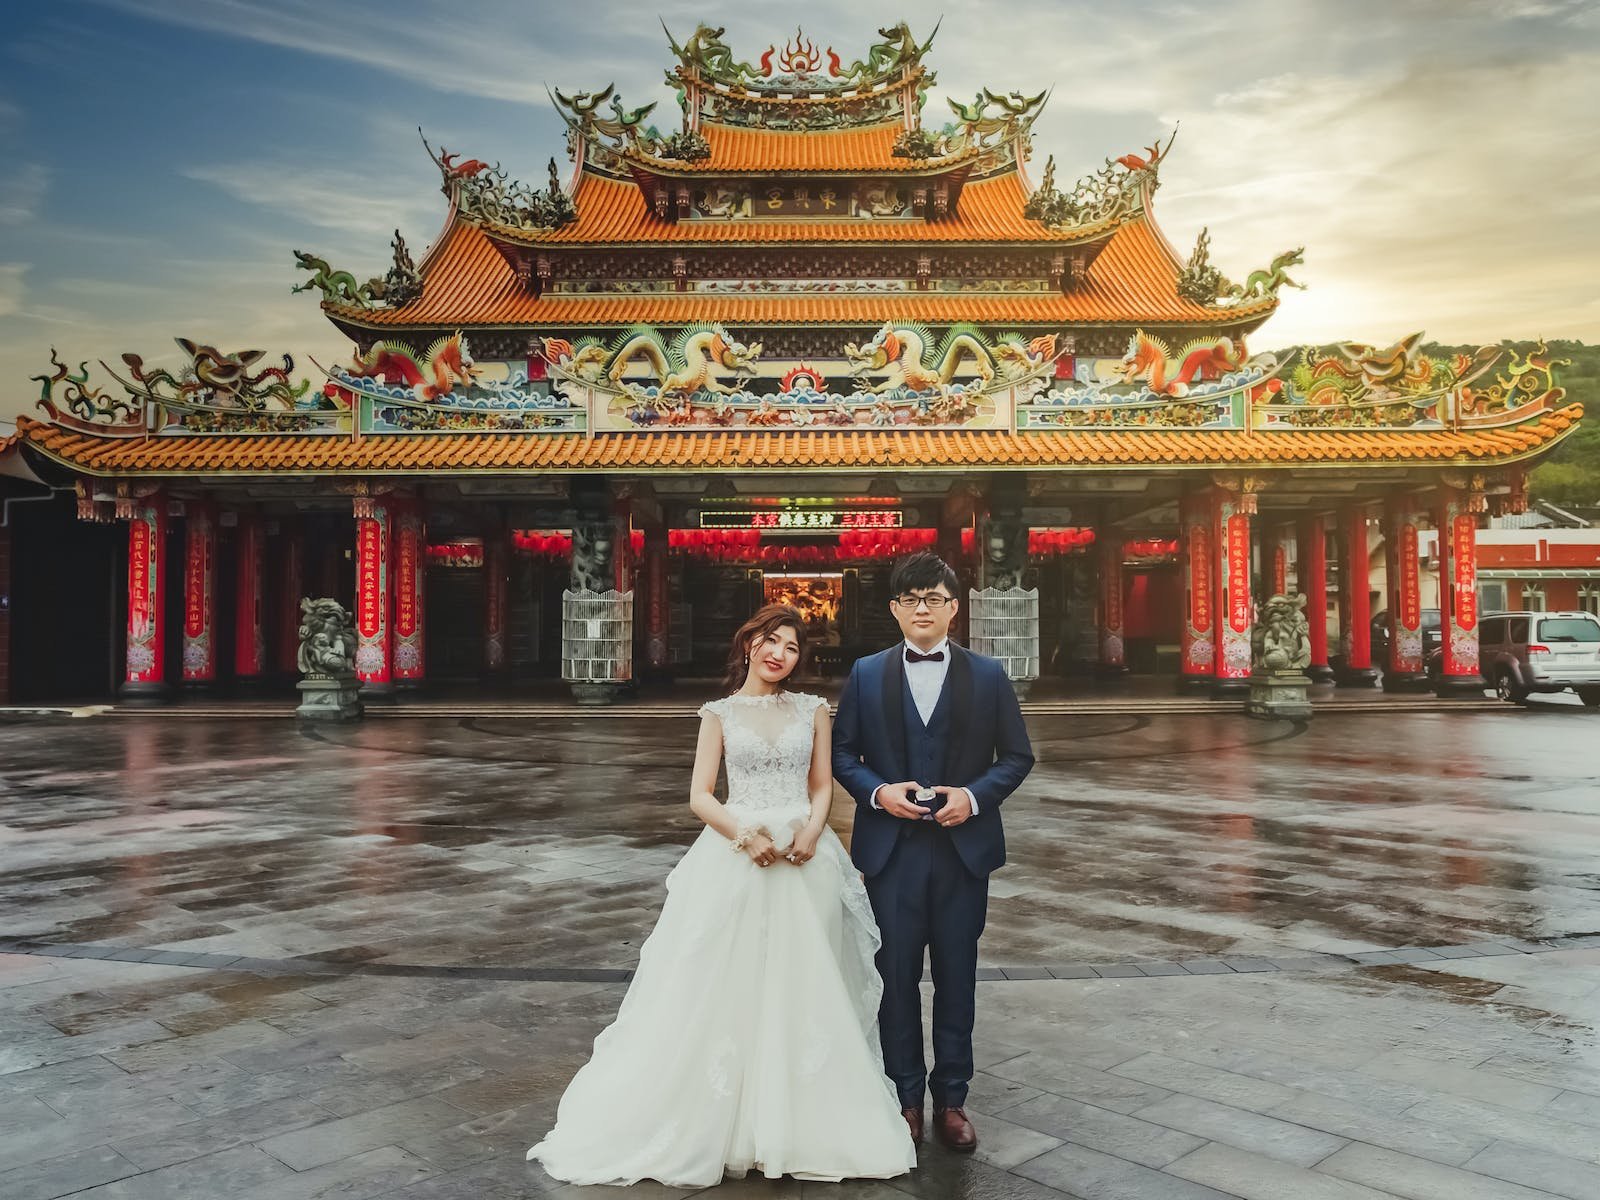 A Bride and Groom Standing in Front of the Temple